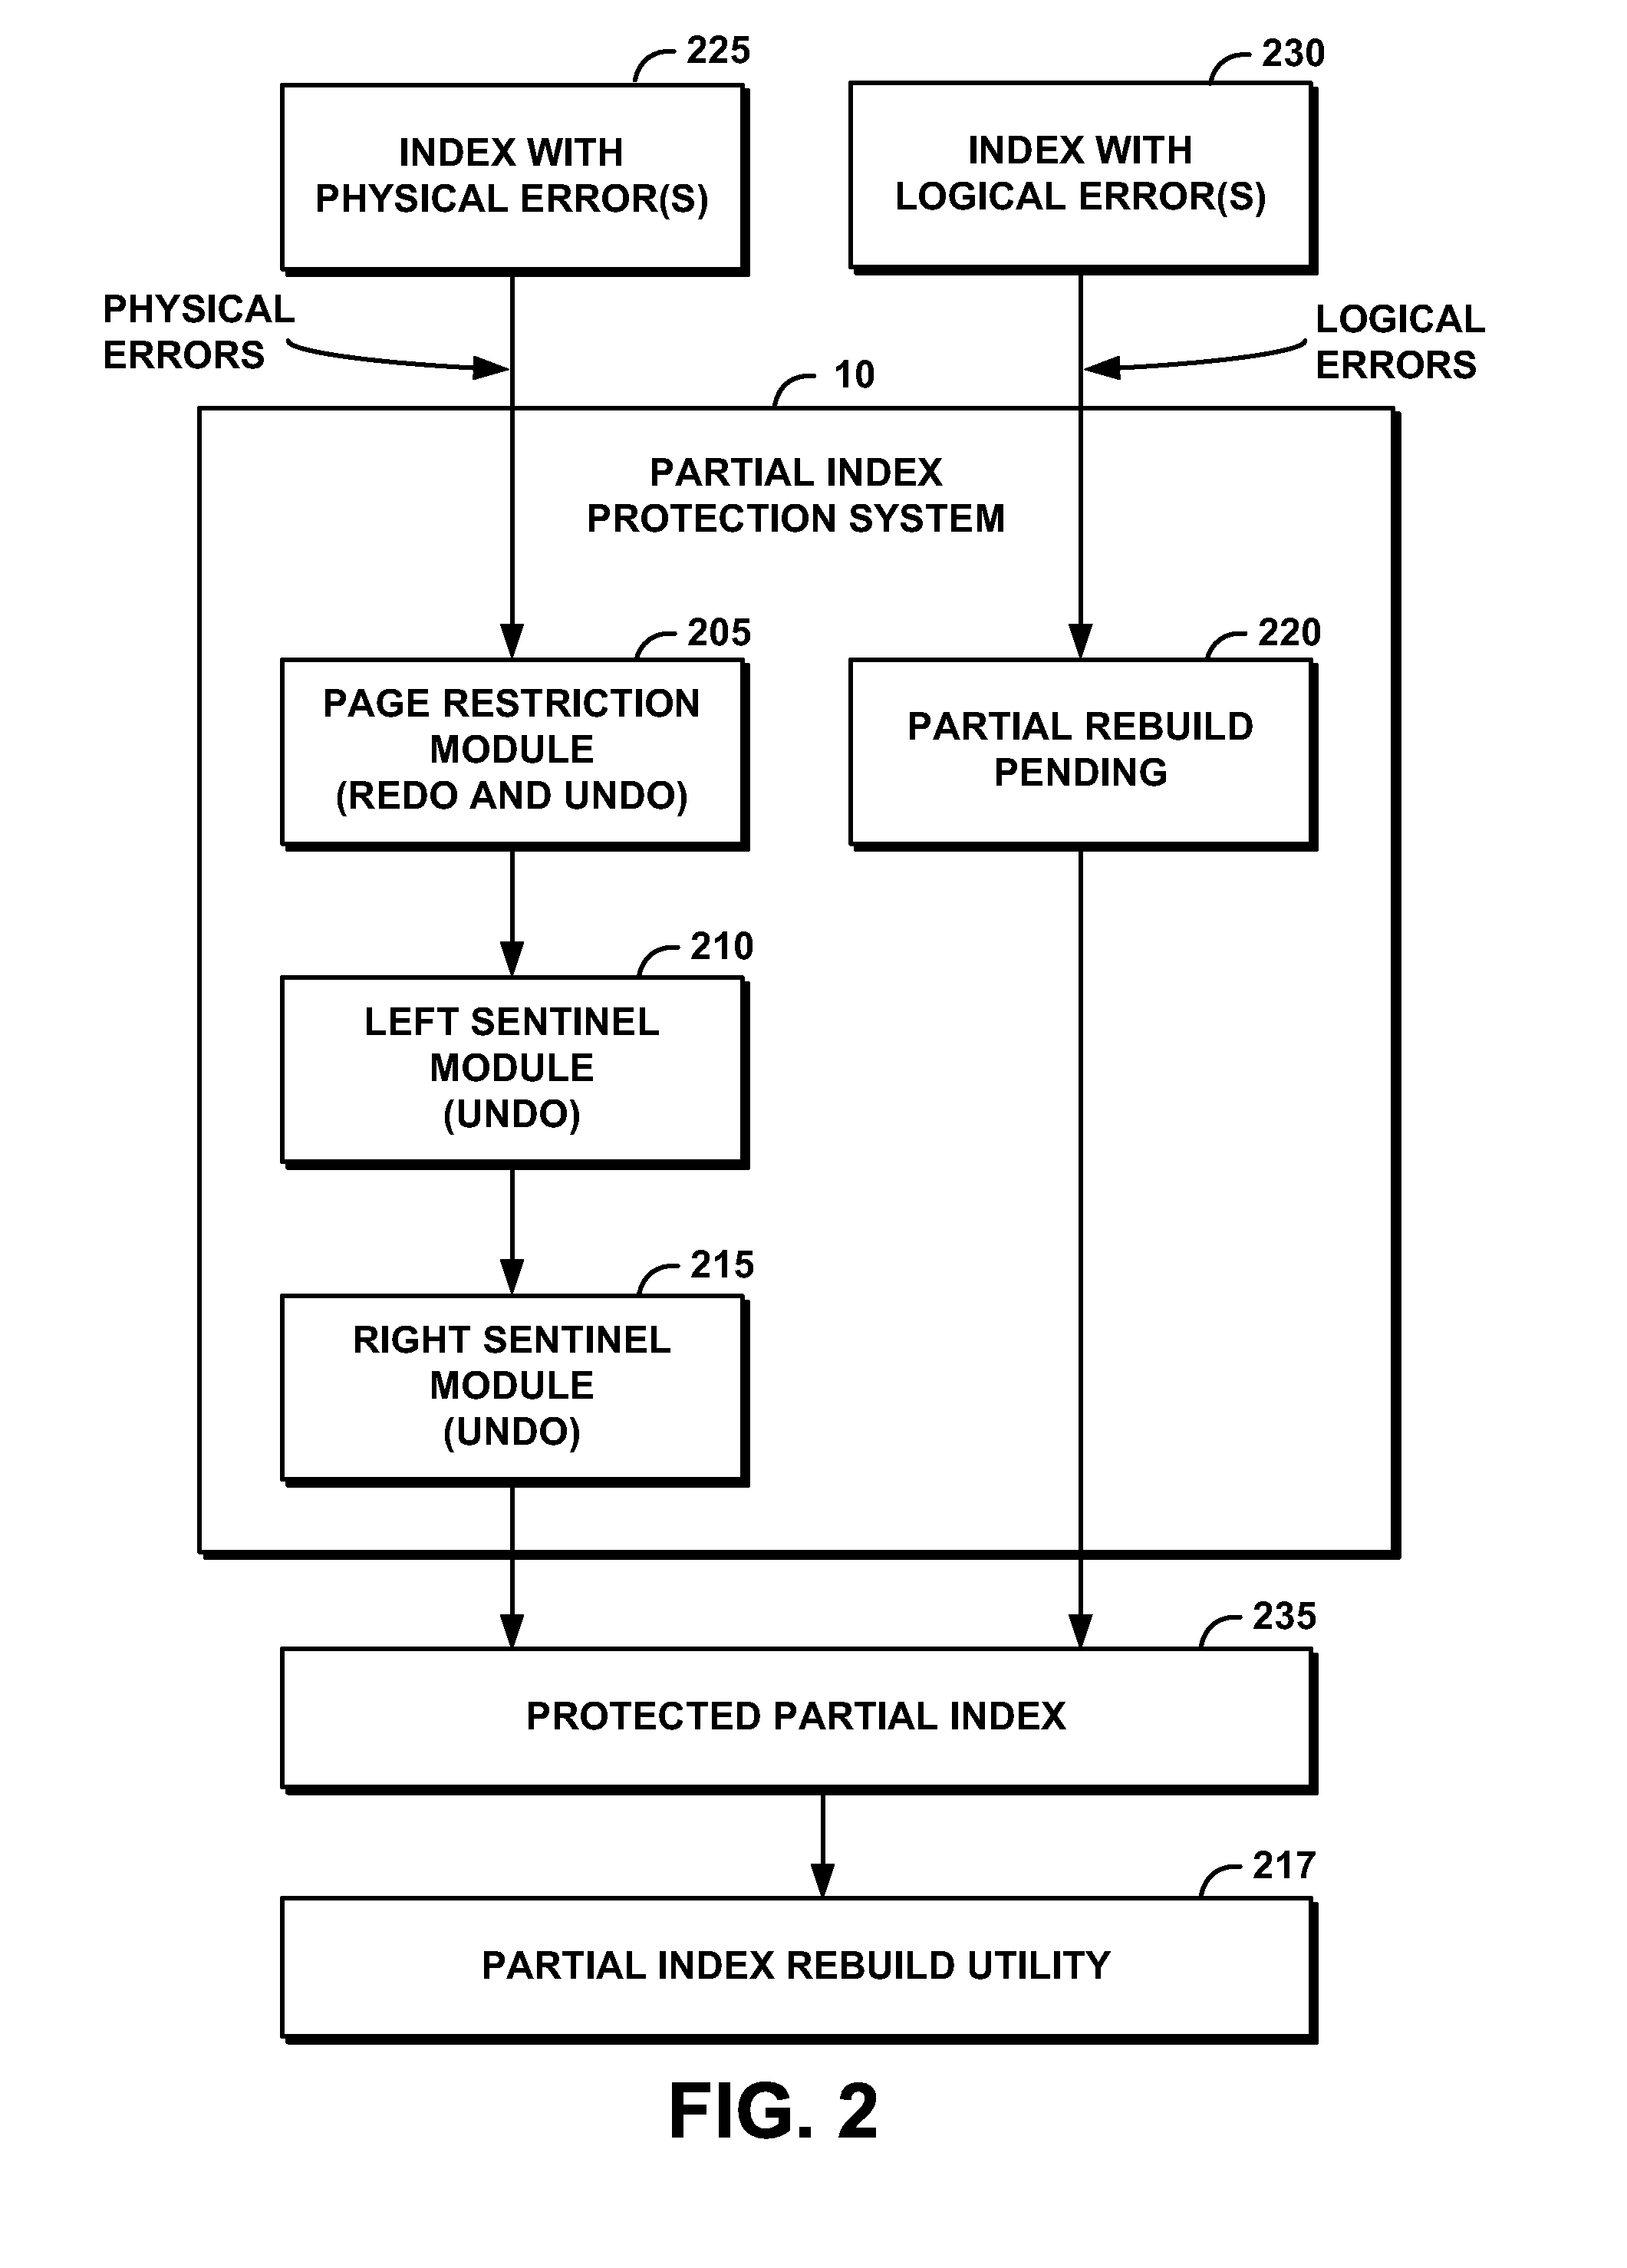 System and Method for Increasing Availability of an Index